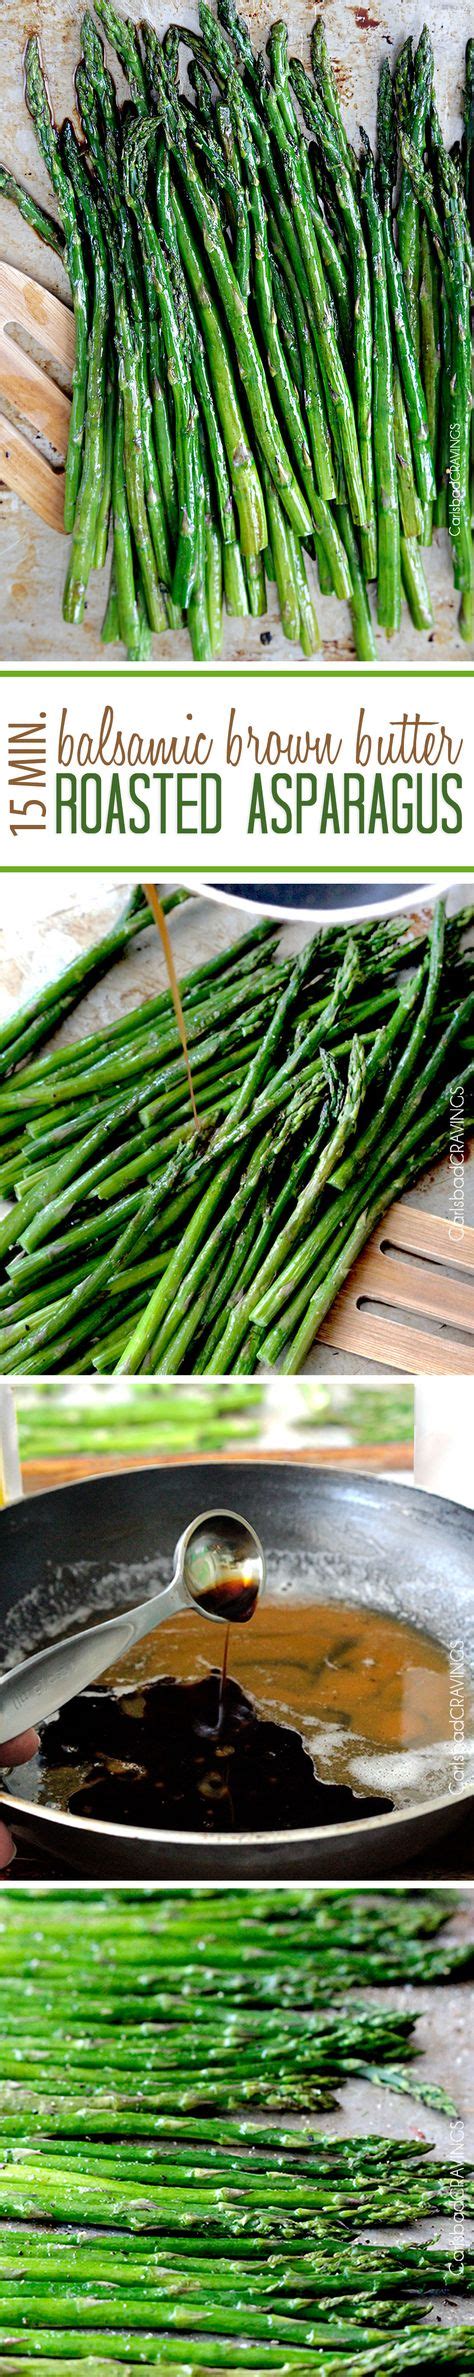 15 Minute Balsamic Brown Butter Roasted Asparagus Roasted Asparagus